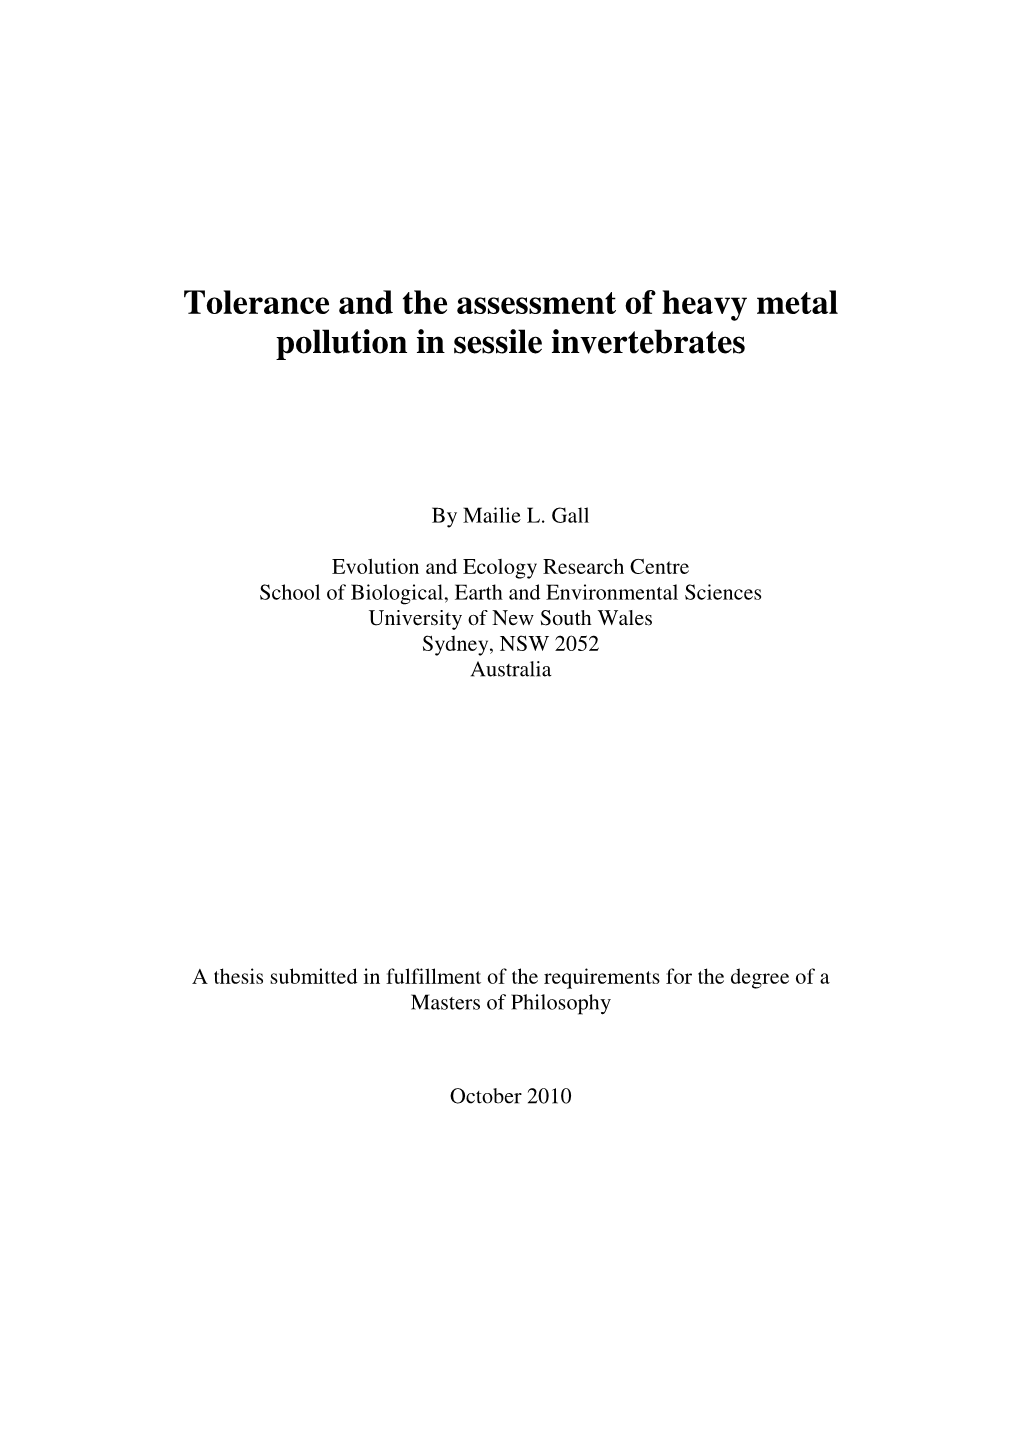 Tolerance and the Assessment of Heavy Metal Pollution in Sessile Invertebrates